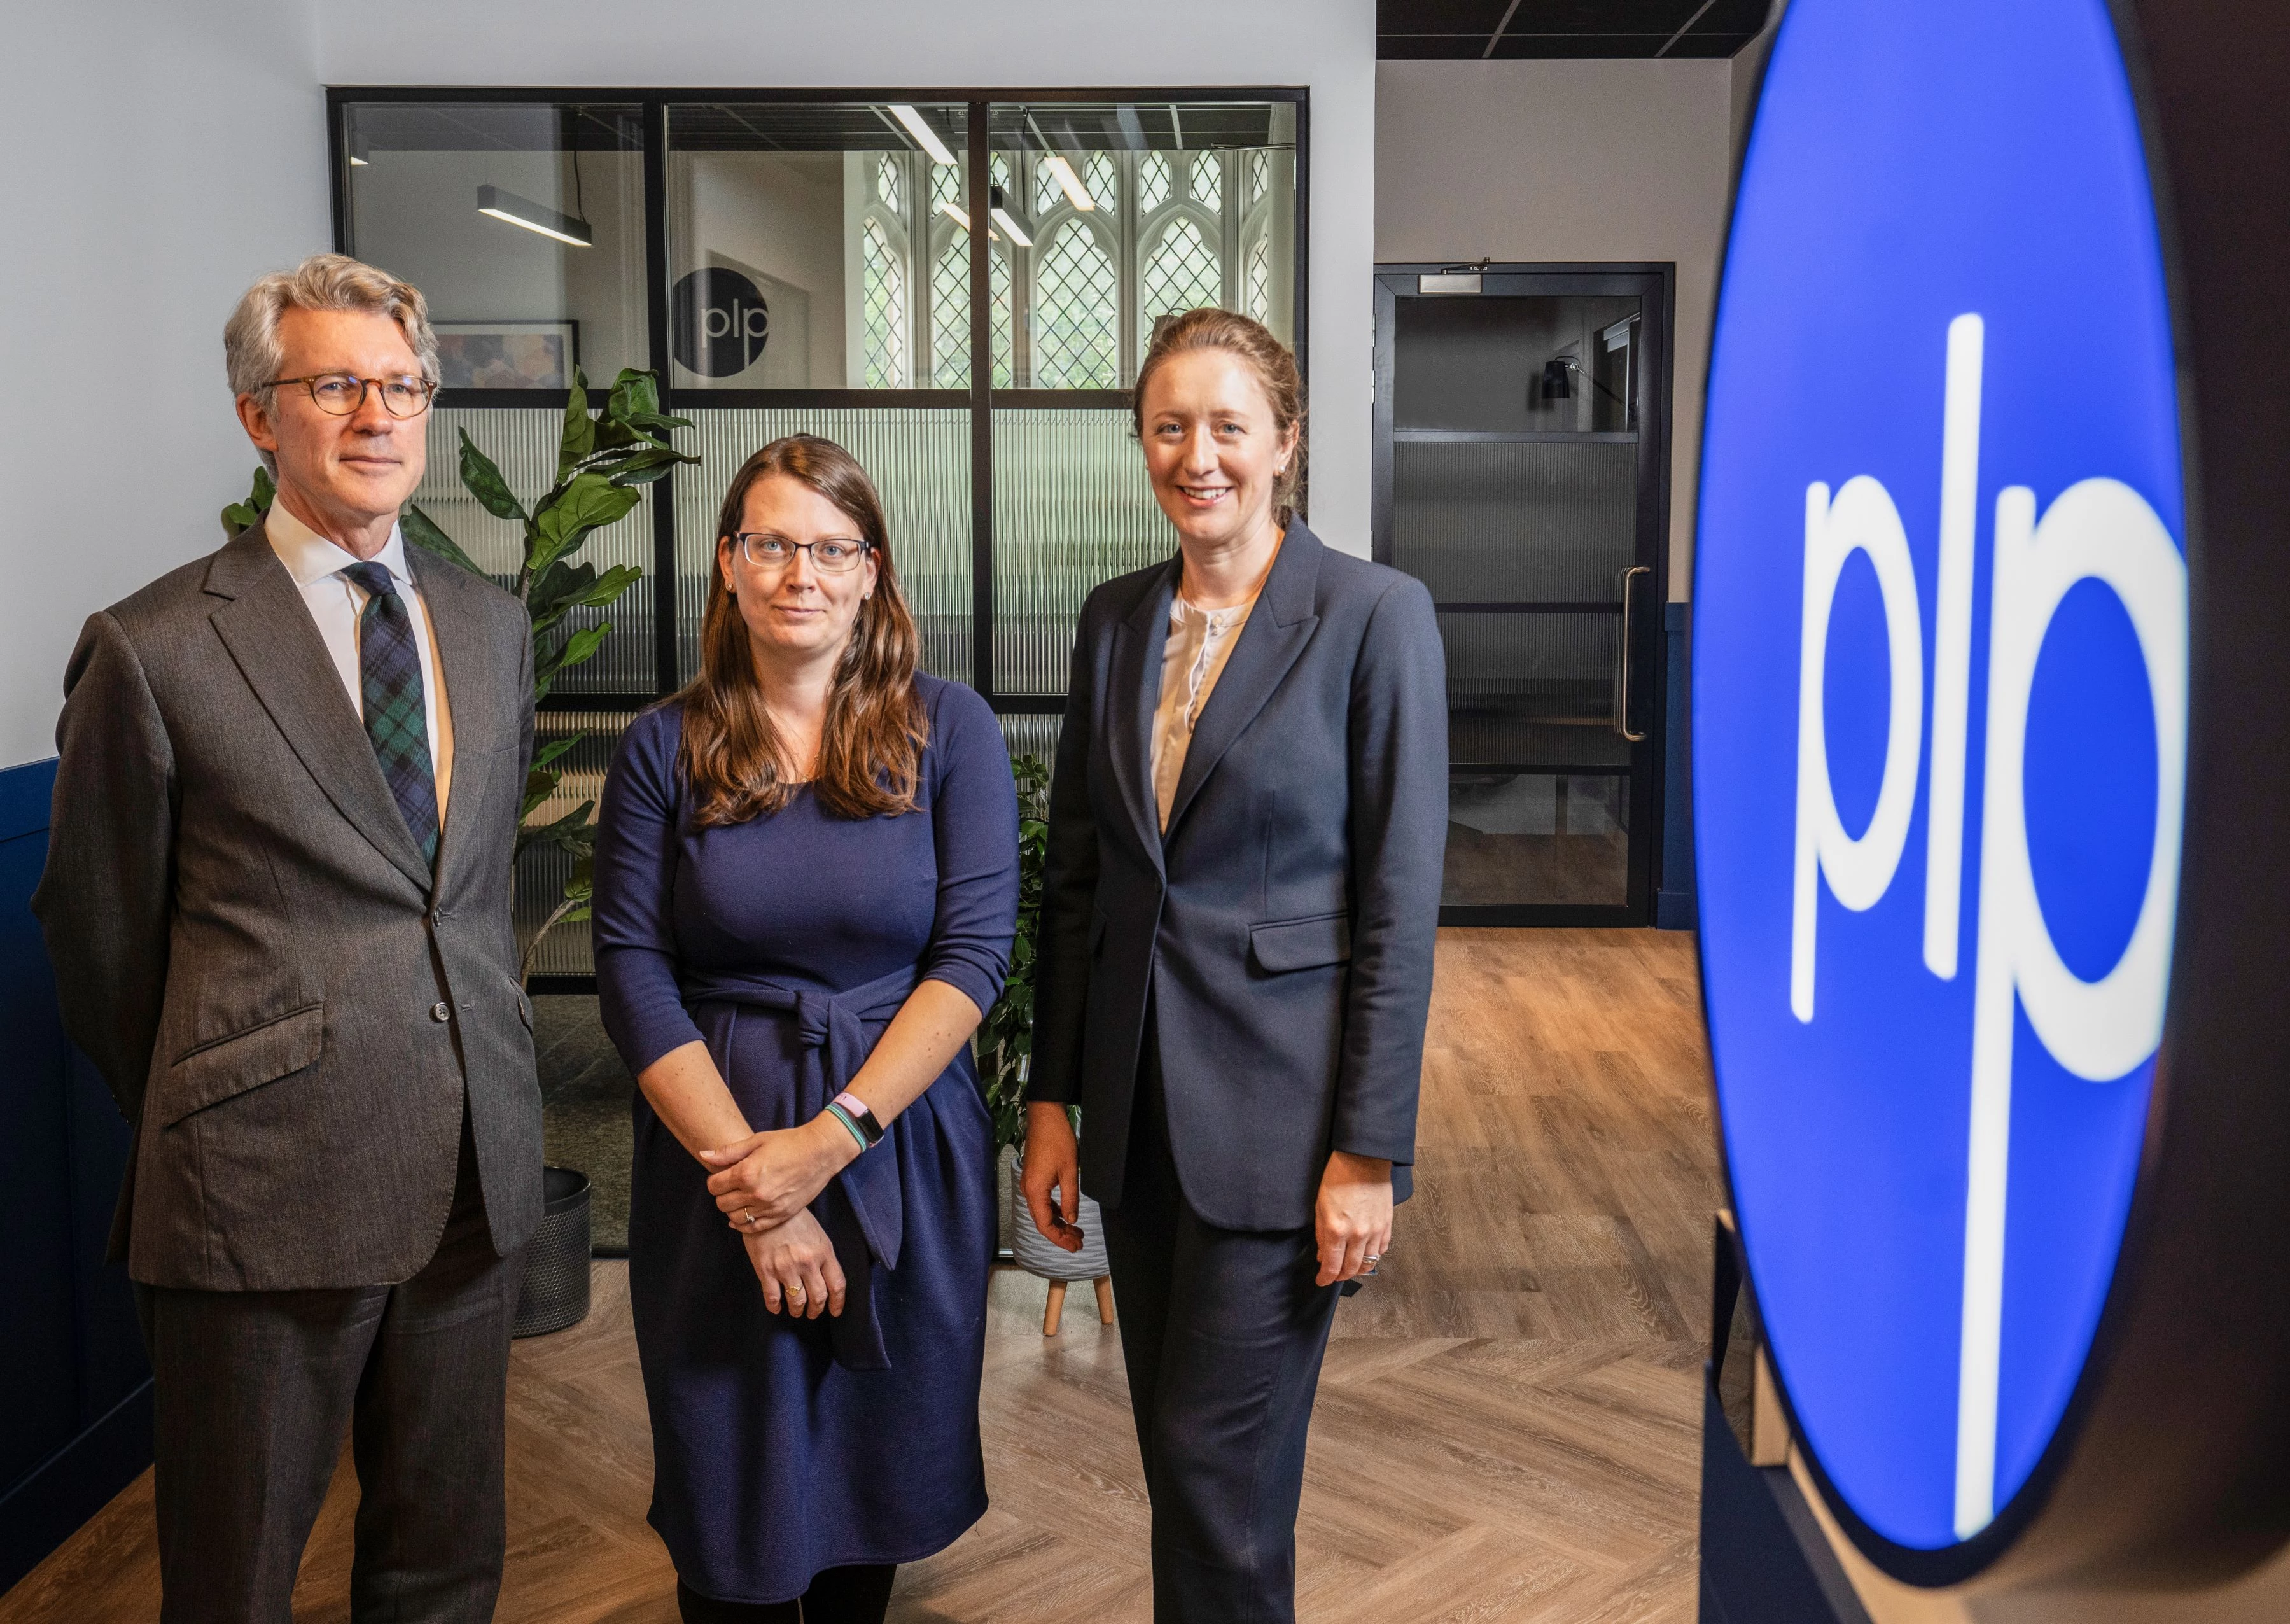 Parklane Plowden Chambers barrister Andrew Crouch, office manager Rachael Duck and barrister Claire Millns.